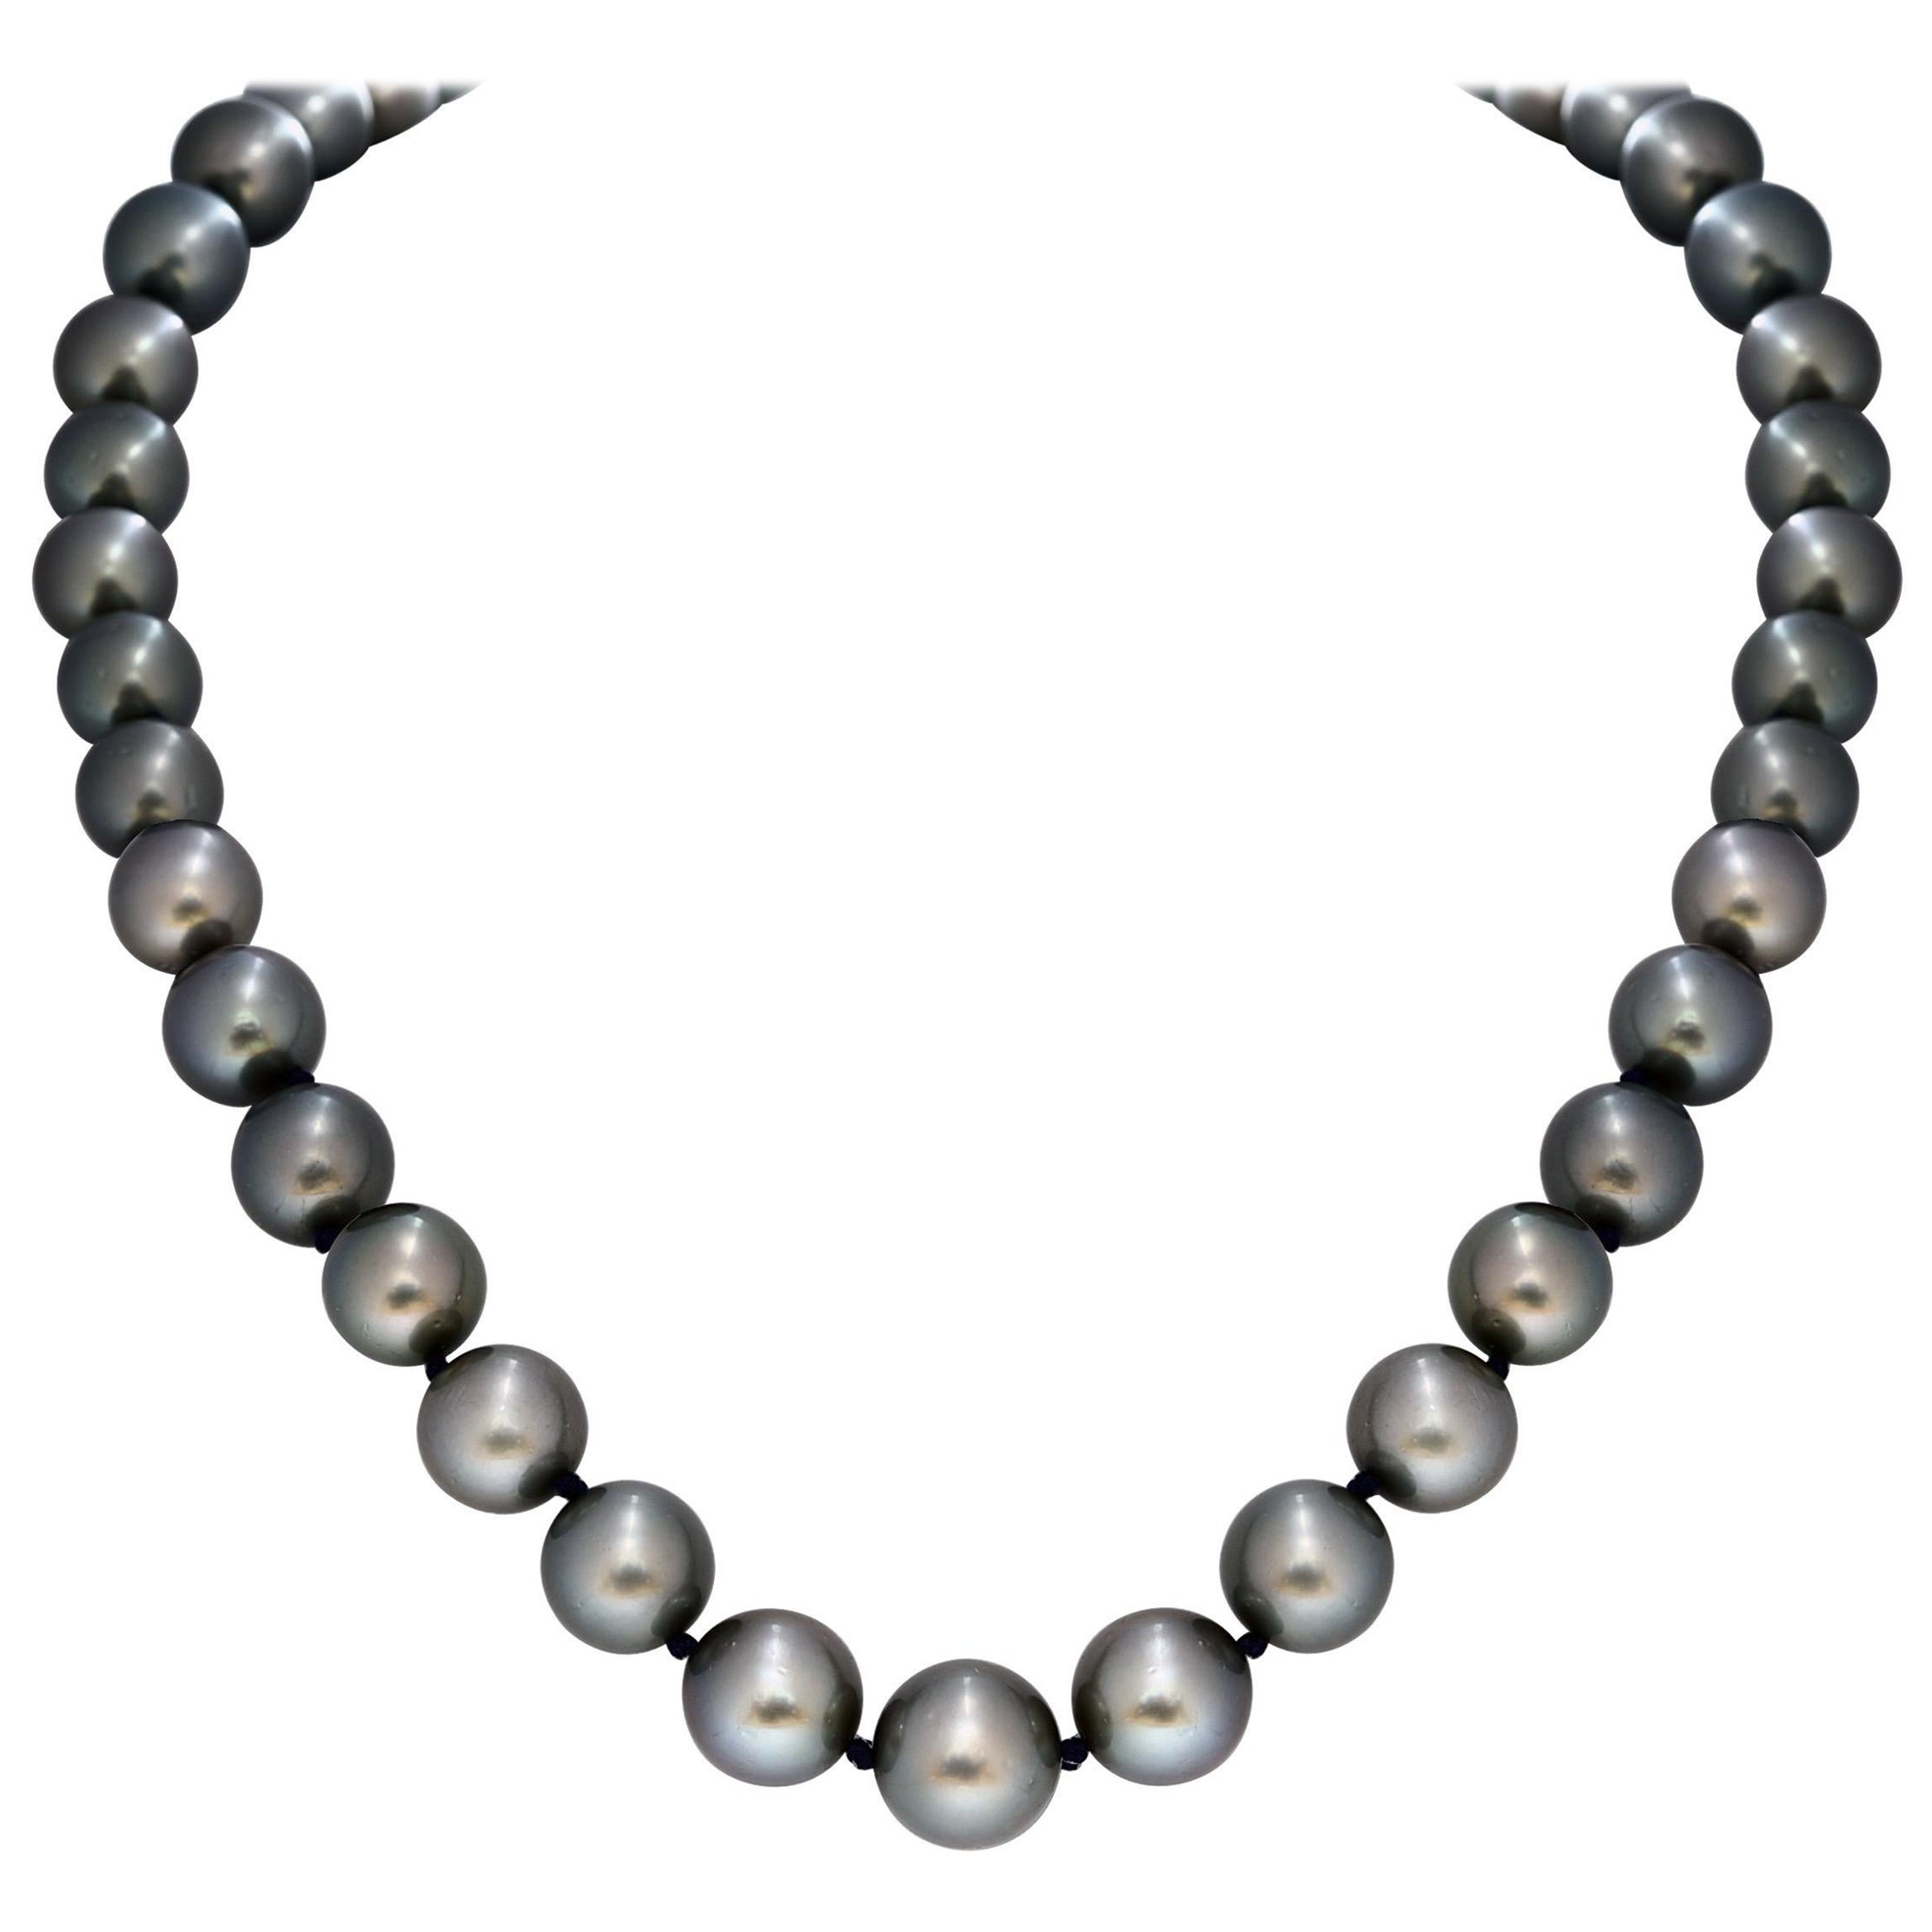 11-15 mm Tahitian Black Graduating Pearls Strand Necklace, Estate, WG For Sale